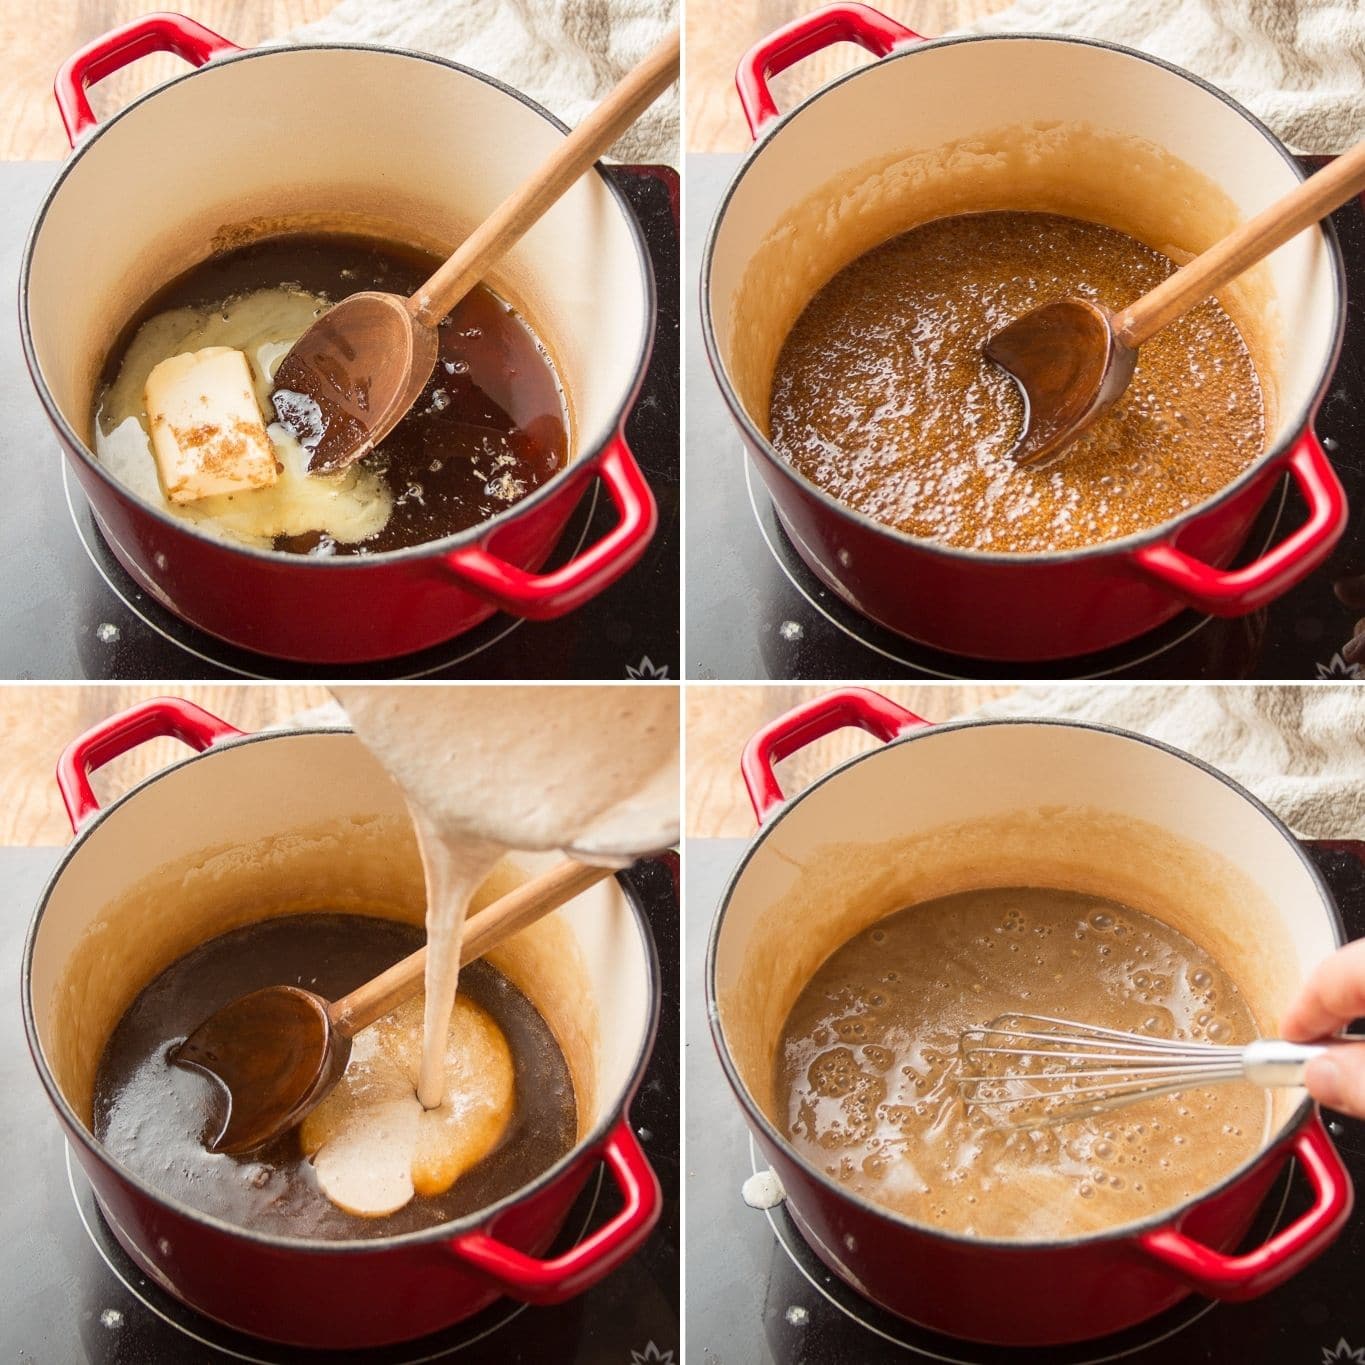 Collage Showing 4 Stages of Cooking Vegan Pecan Pie Filling: Place Ingredients in Pot, Simmer, Add Blended Ingredients, and Simmer Again